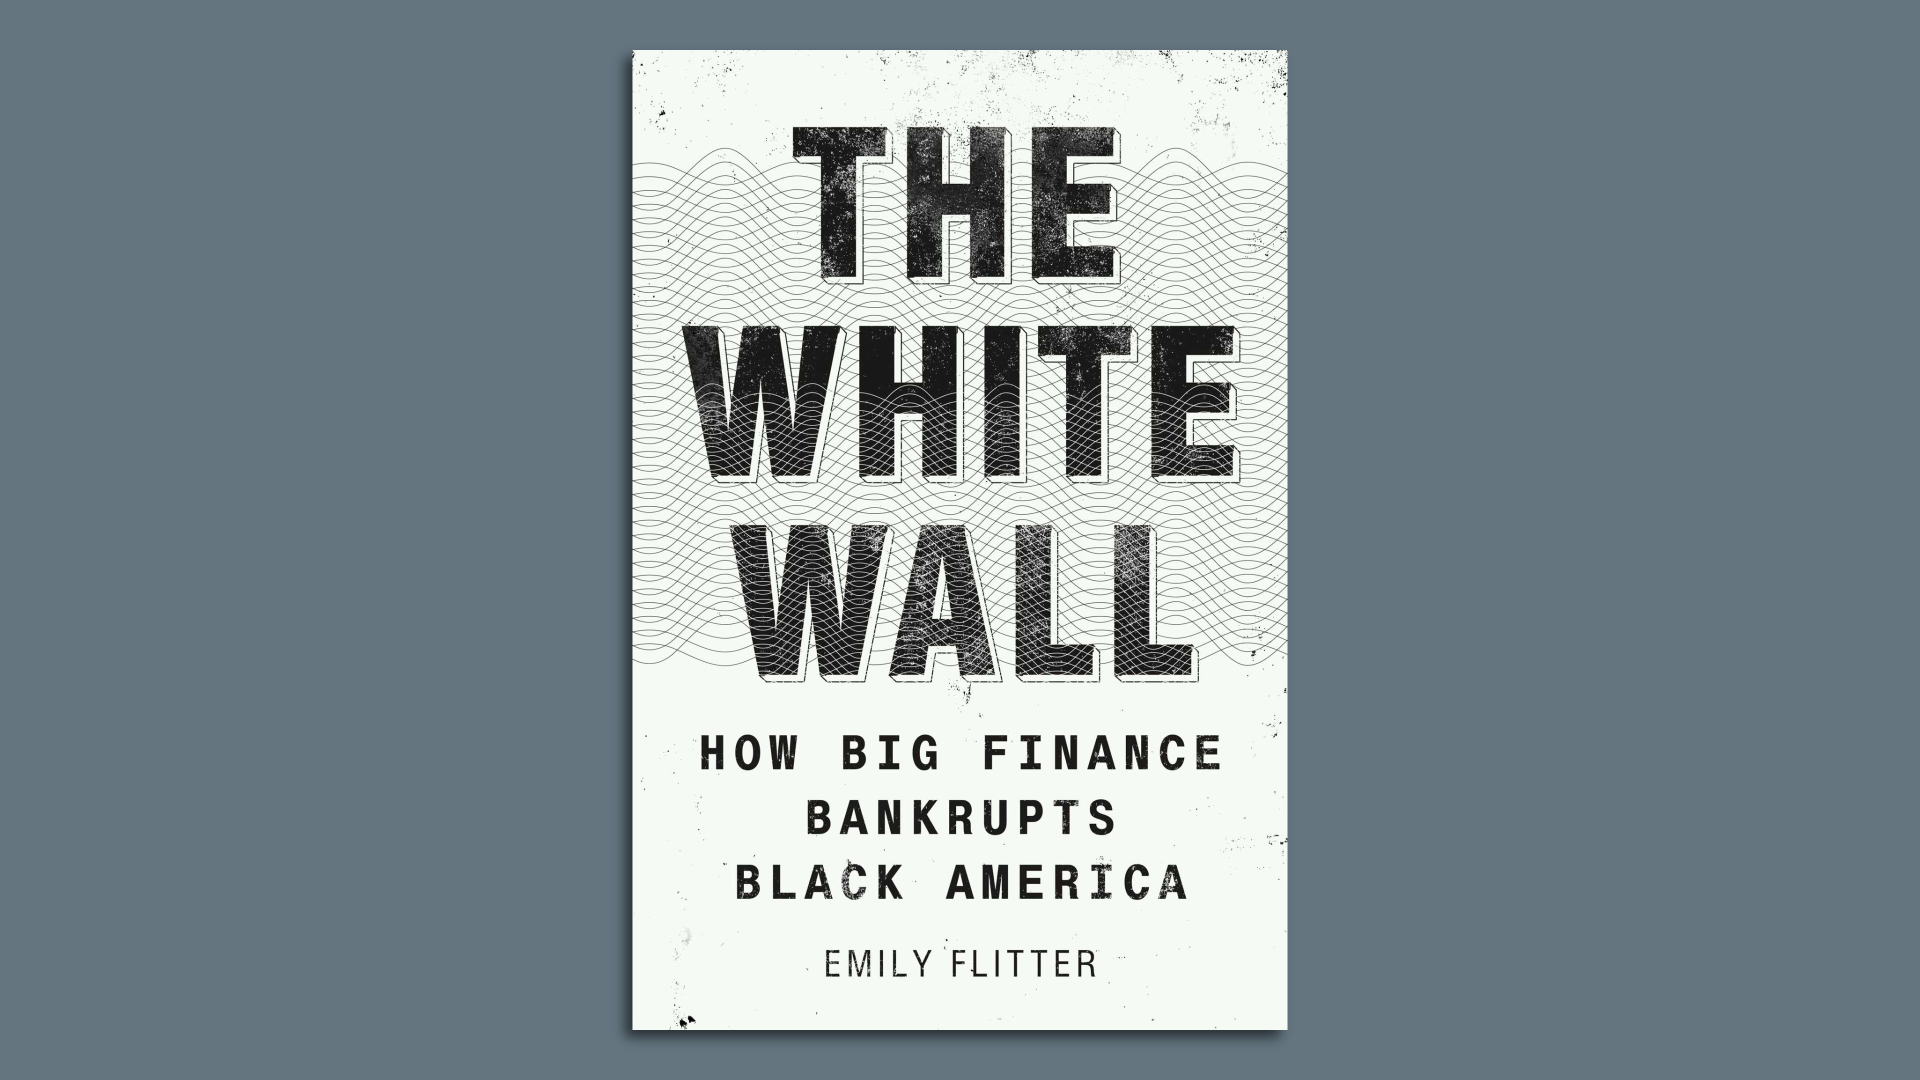 Cover image of the book "The White Wall" by Emily Flitter